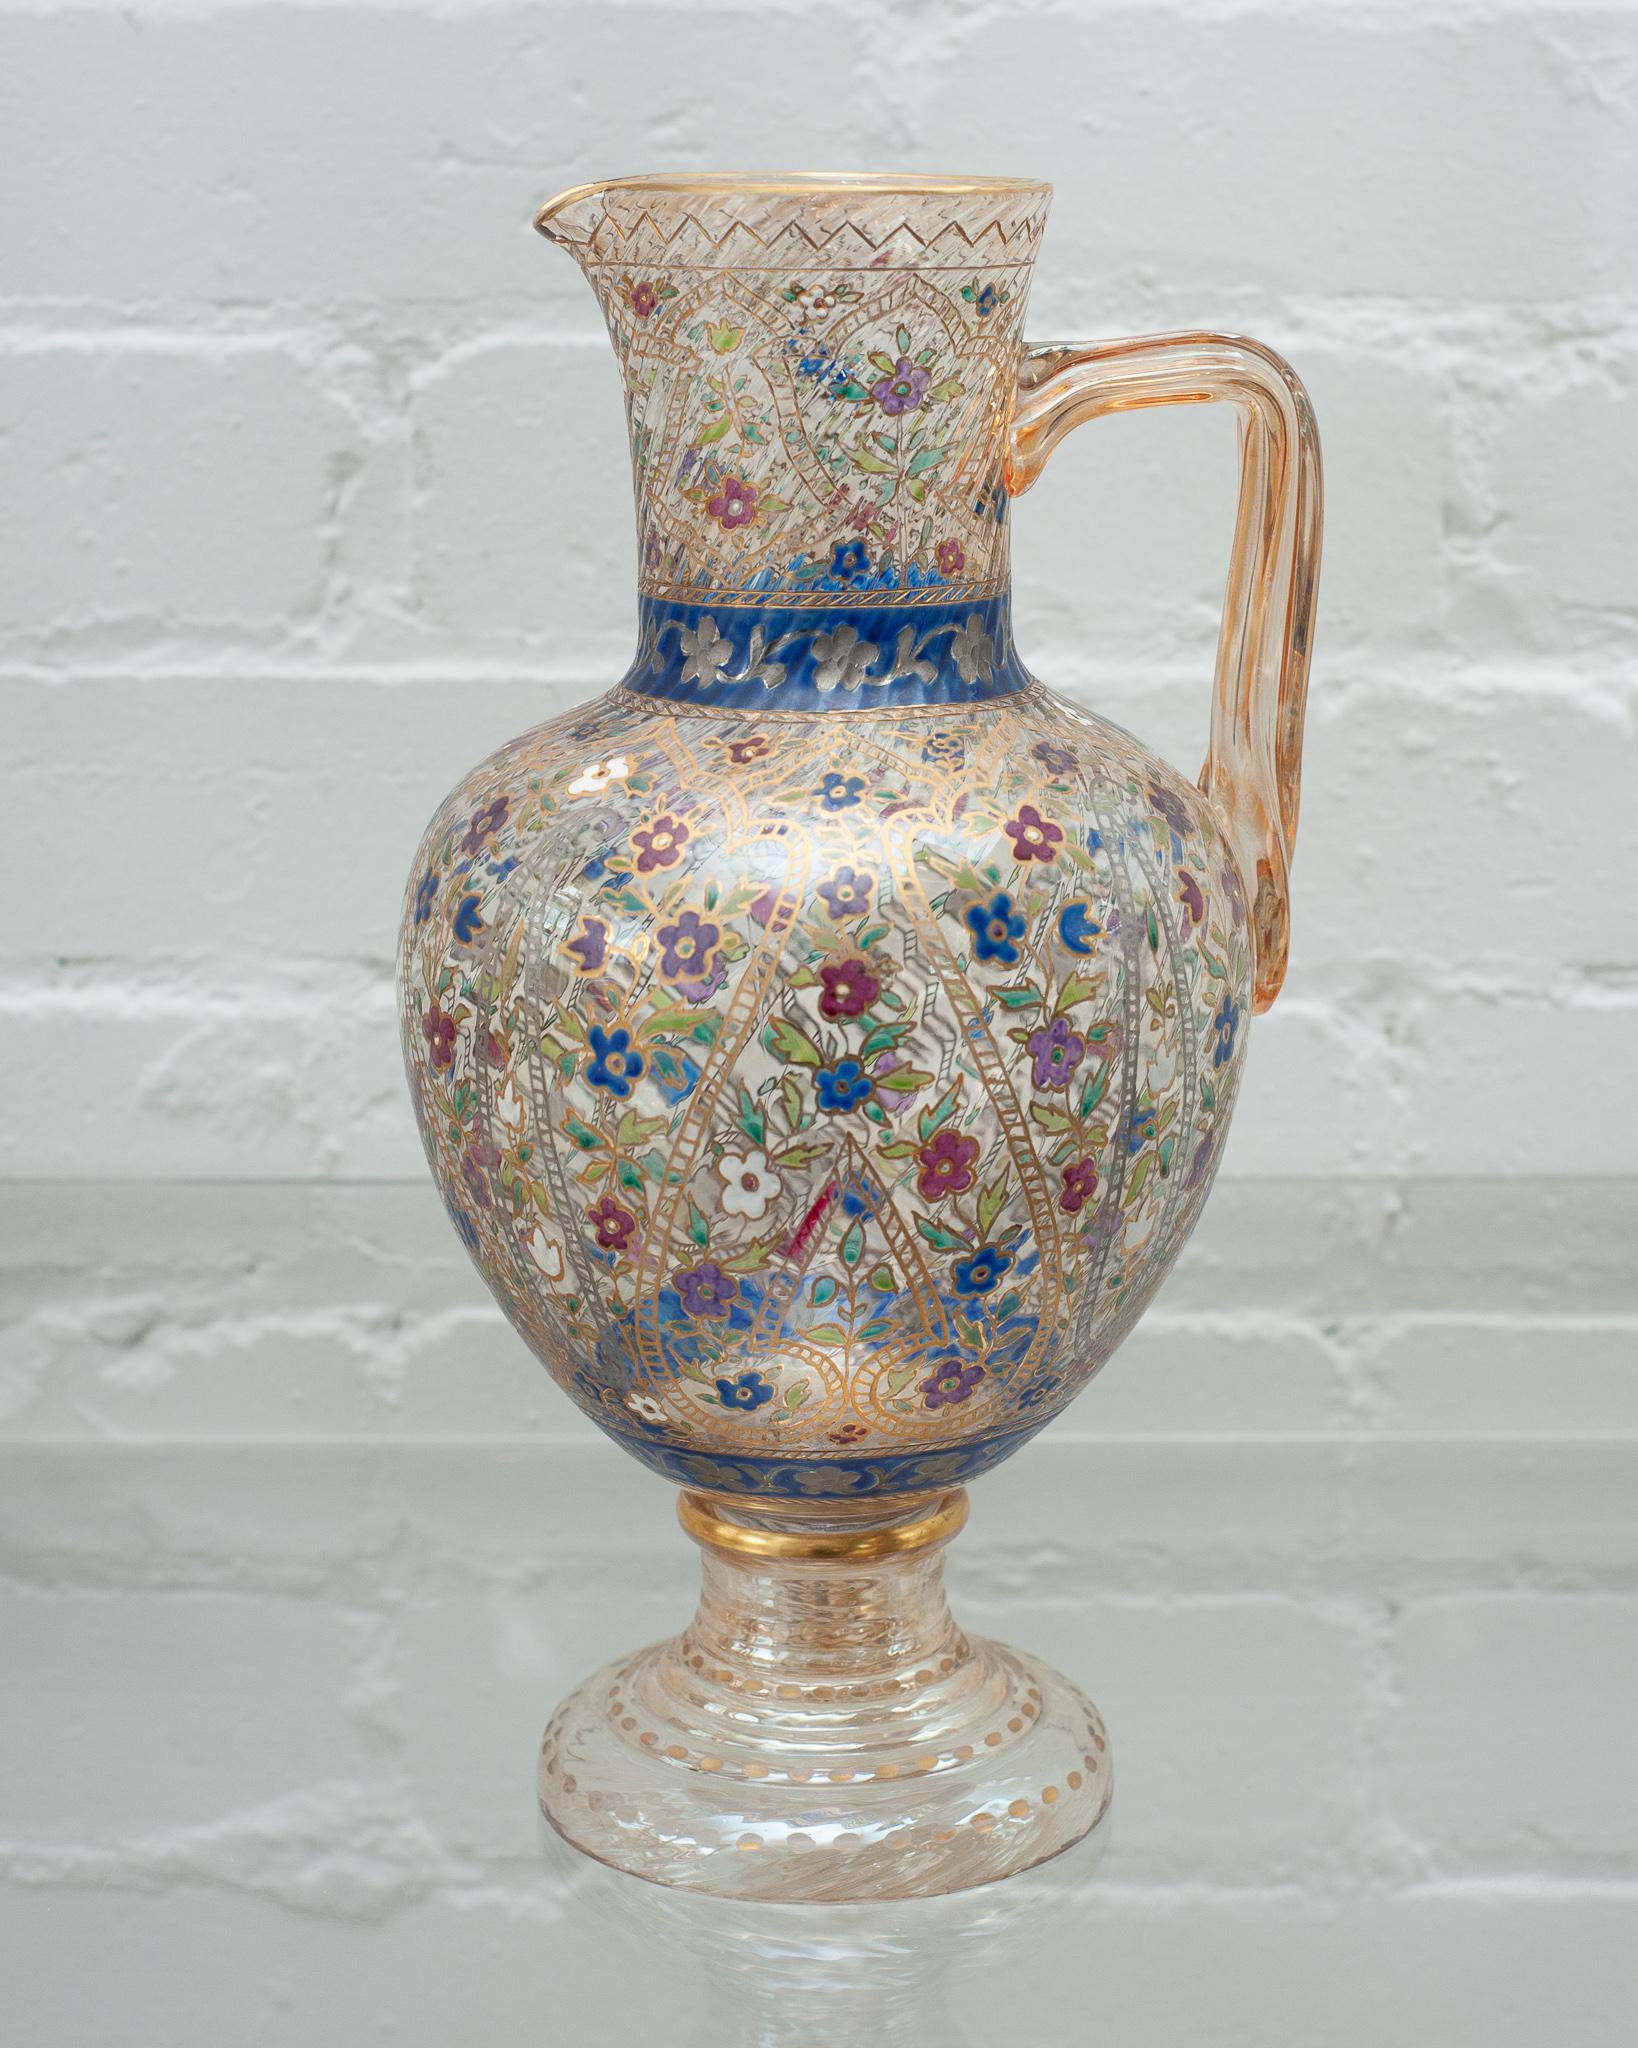 A gorgeous antique Bohemian glass water pitcher with ornate enamel work, circa 1920. Decorated in floral motifs and gold gilding, this vessel will brighten up any table with its fine craftsmanship and bold colour.